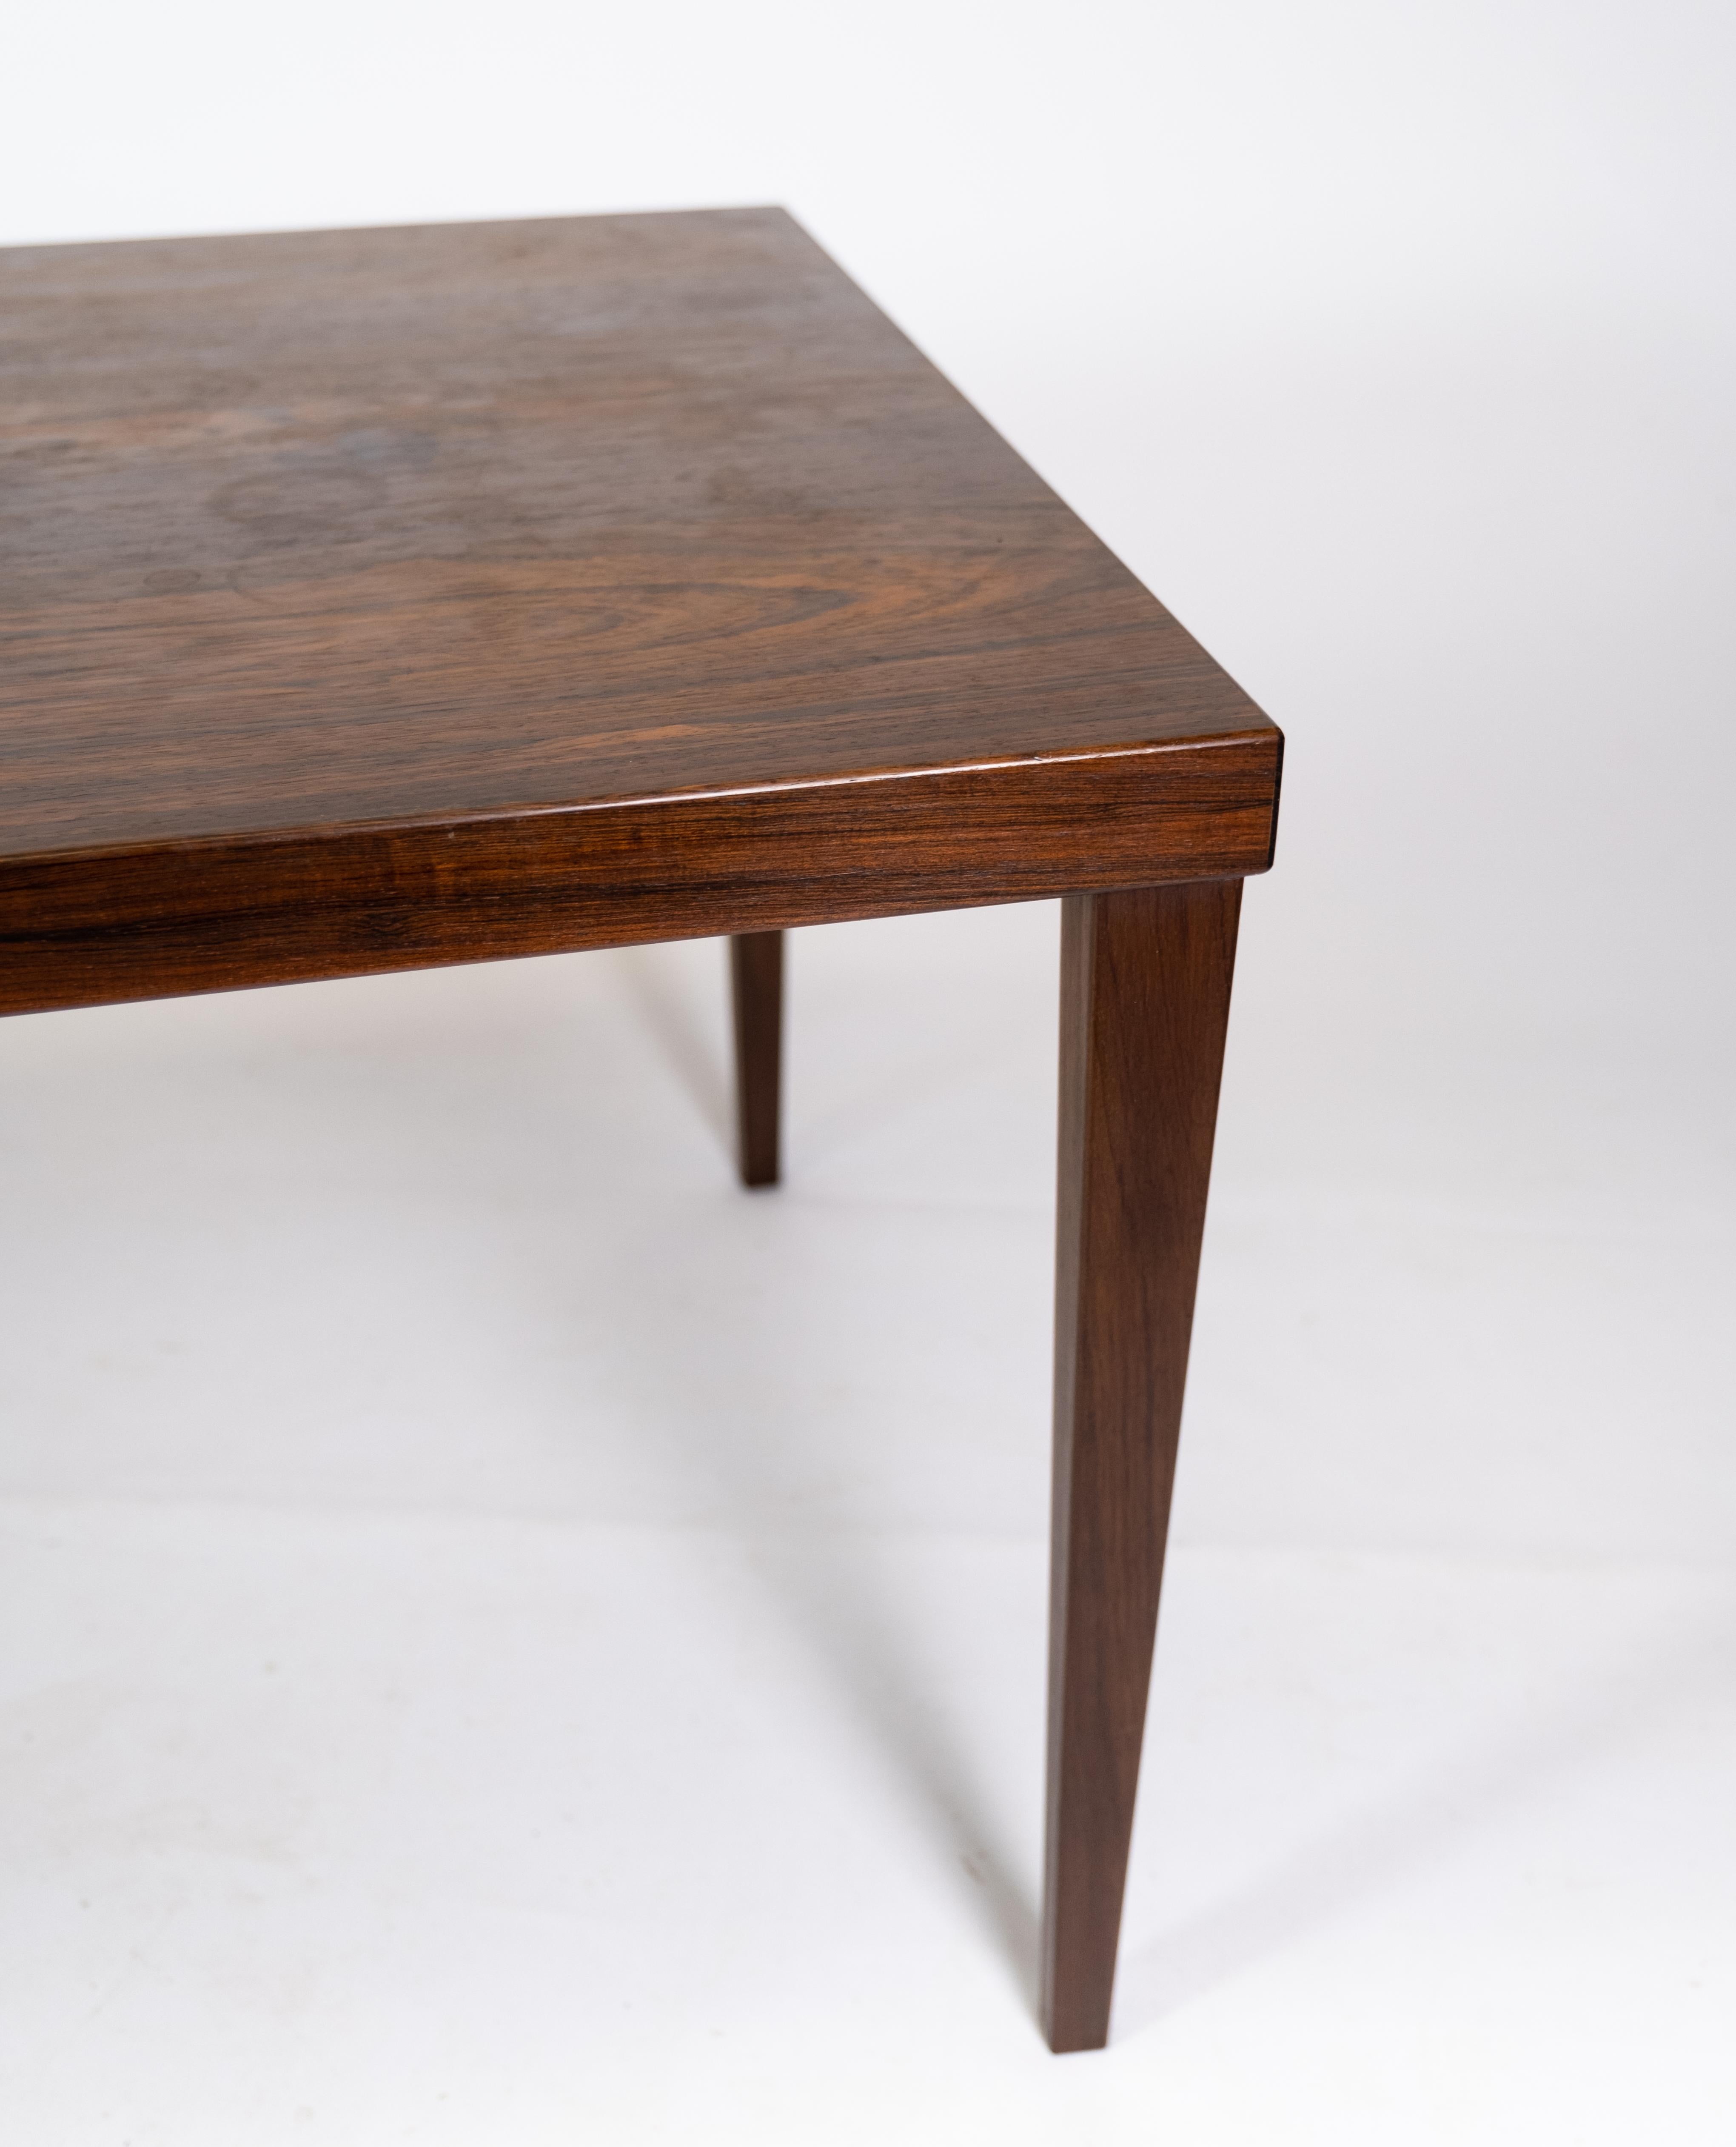 Coffee Table Made In Rosewood, Danish Design From 1960s In Good Condition For Sale In Lejre, DK